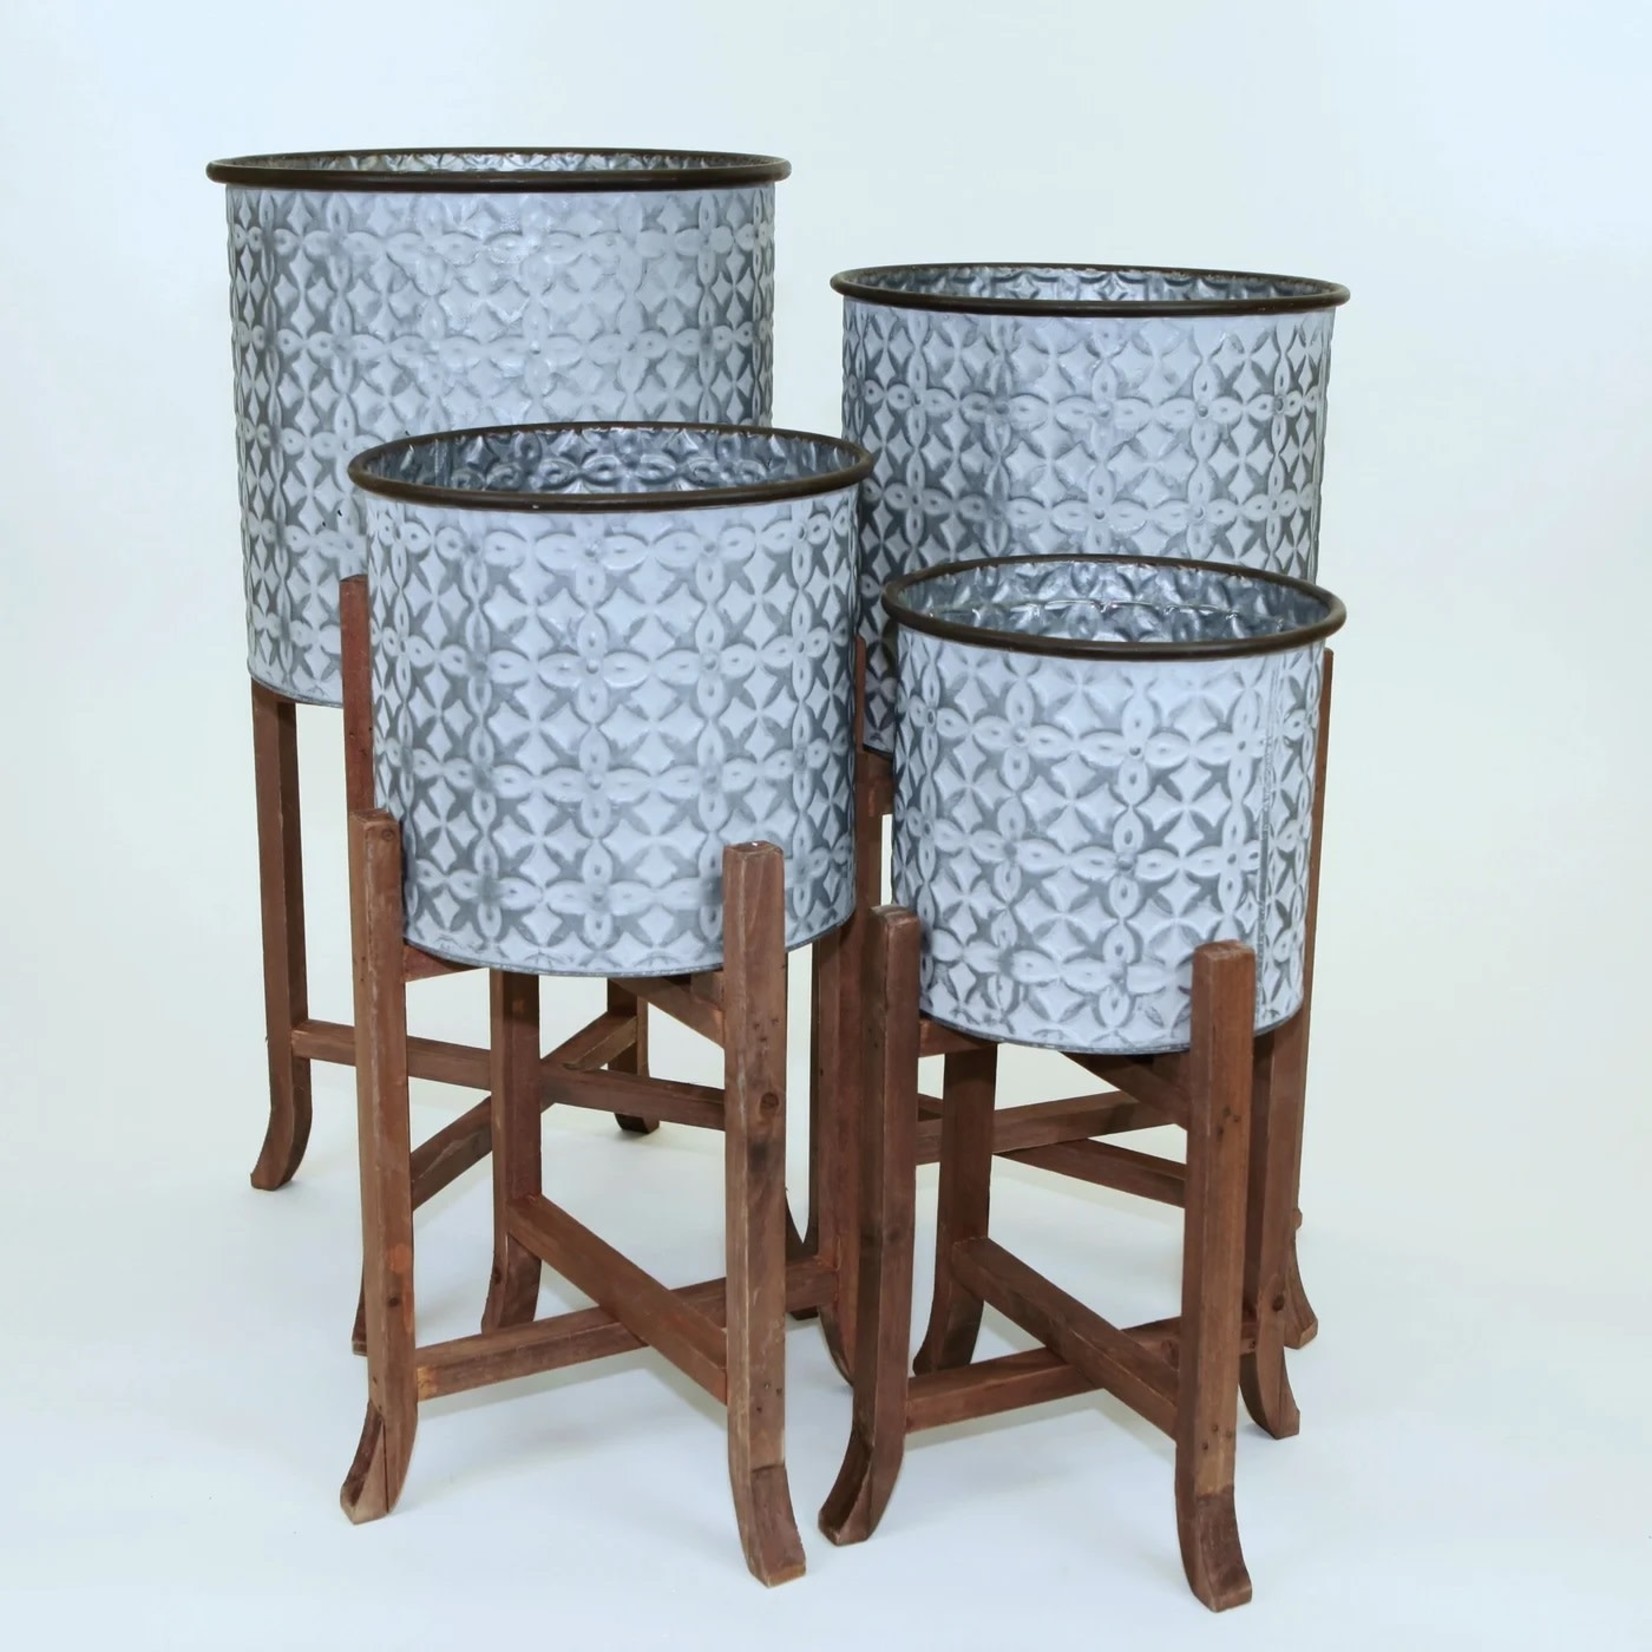 Metal Pots on Wood Stands-XLg